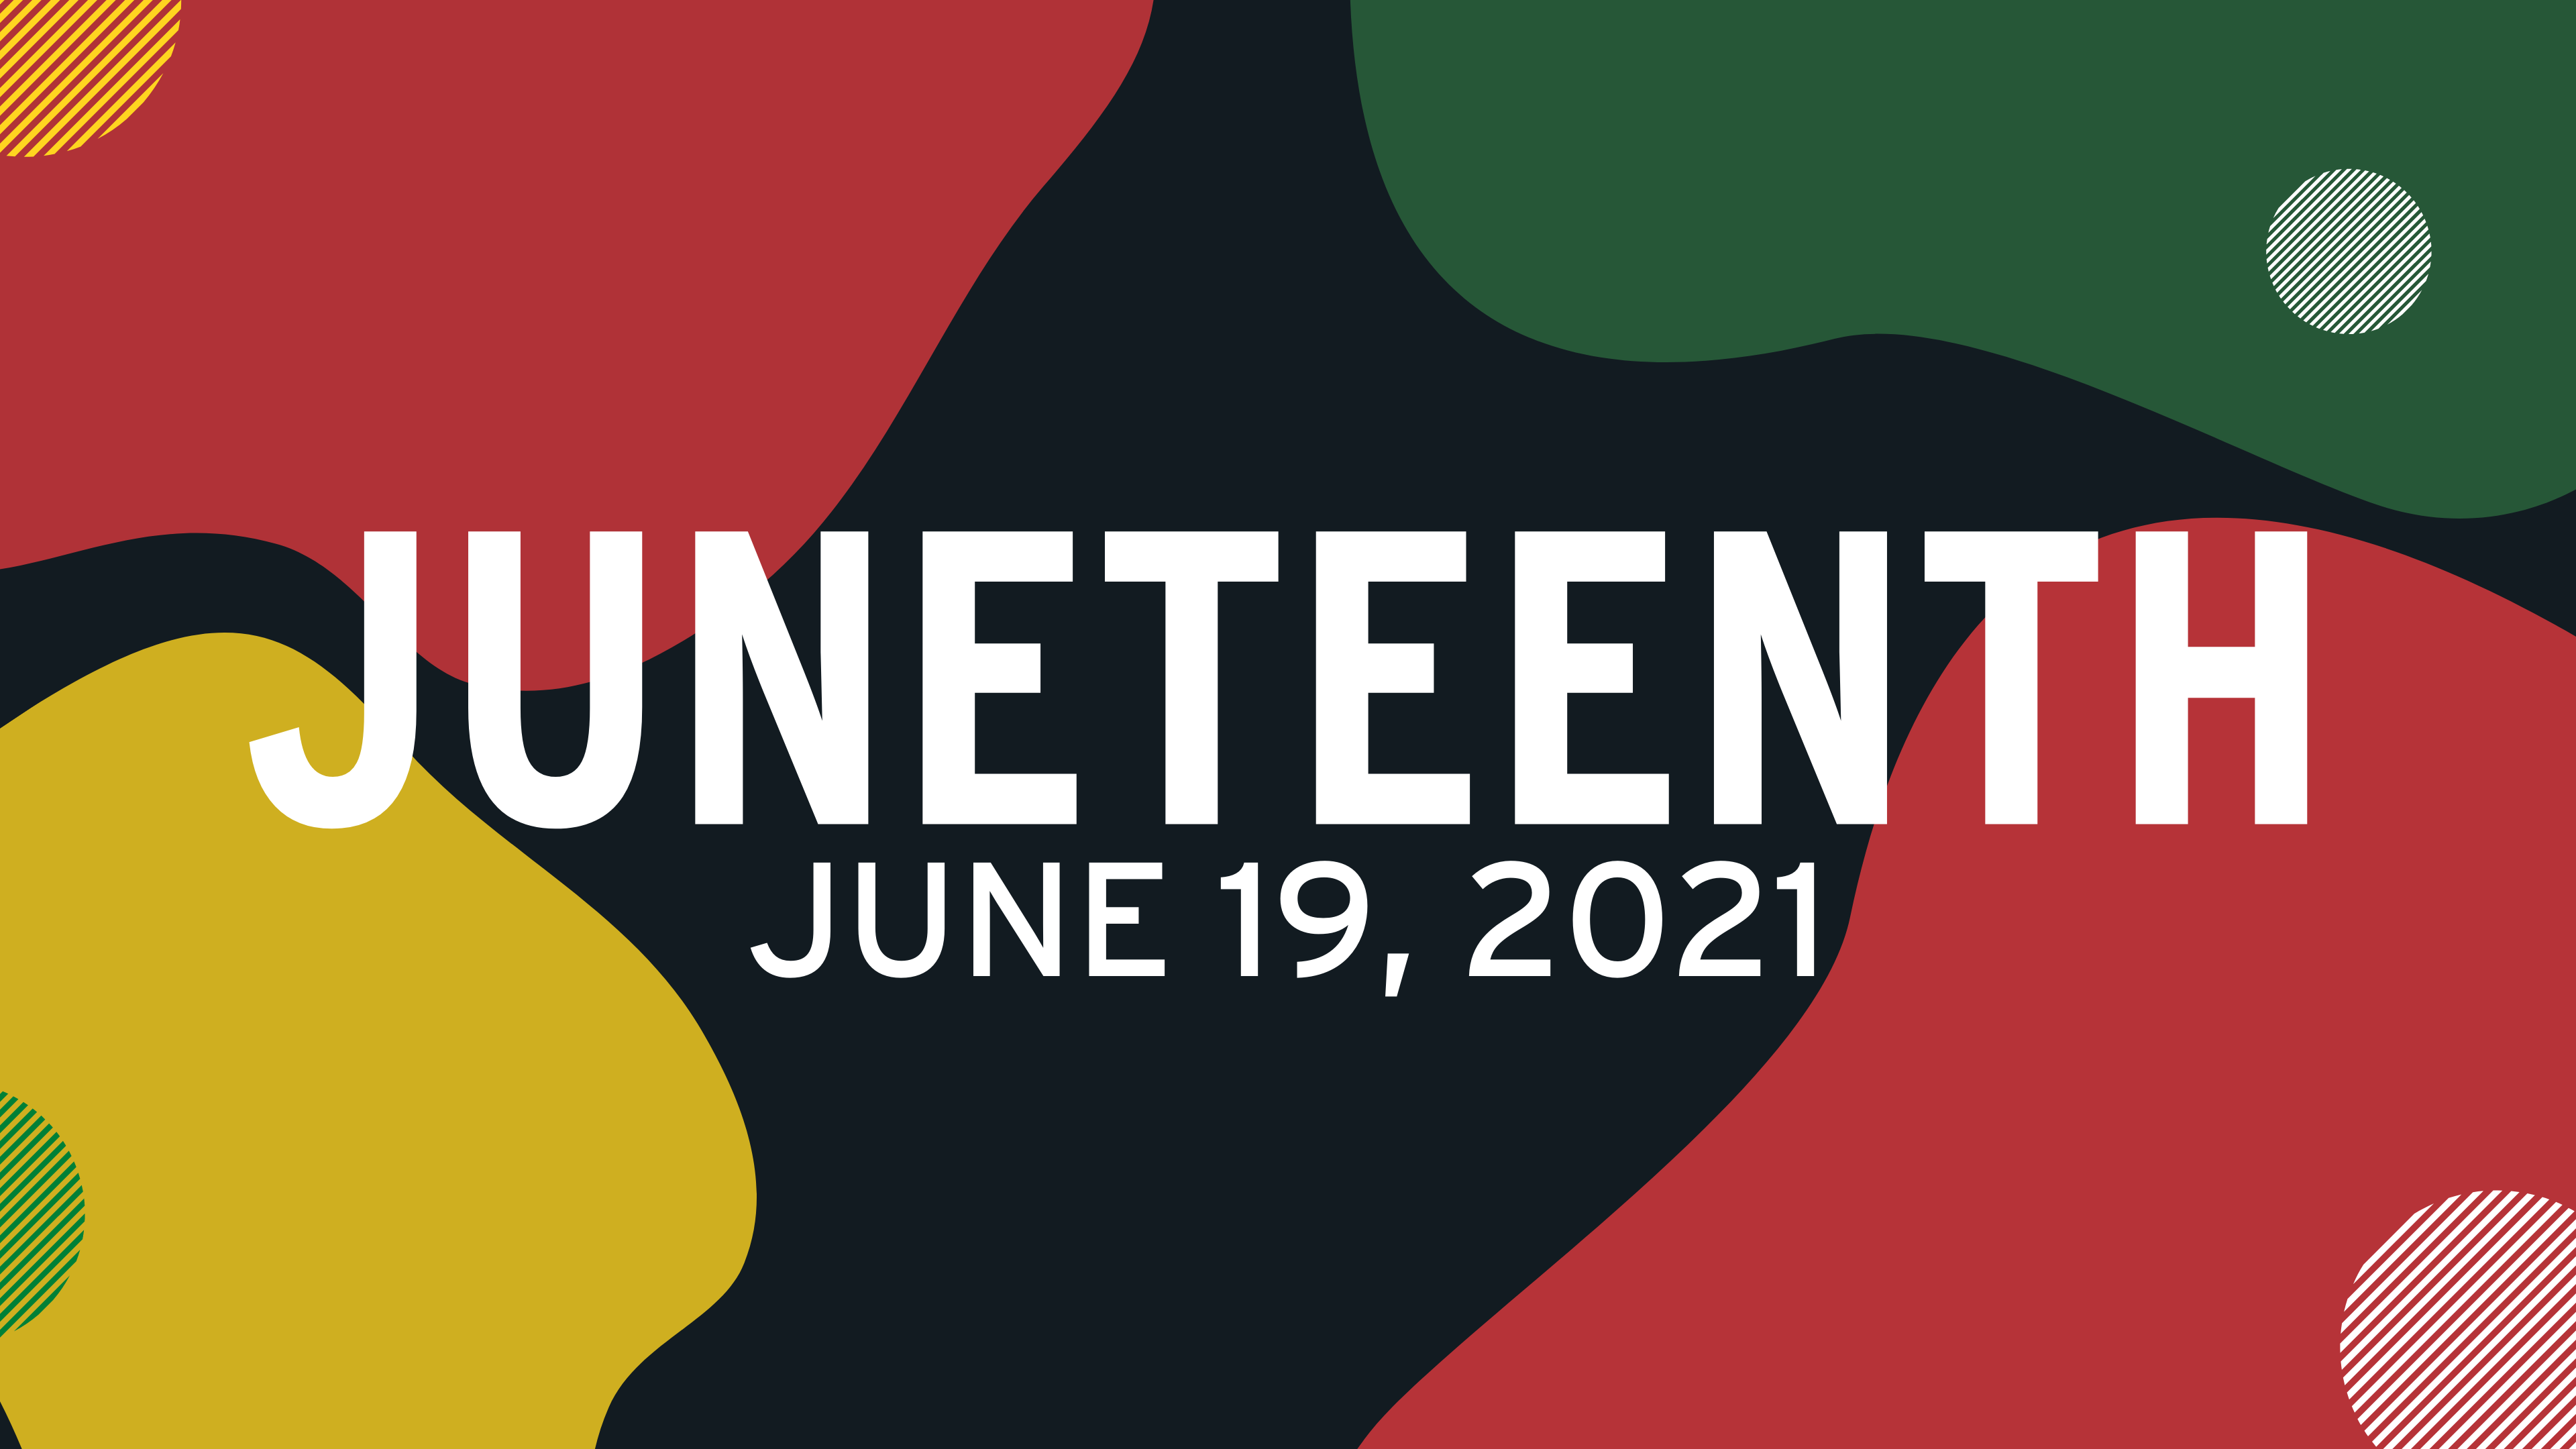 Juneteenth, June 19, 2021 with red, black, green and gold geometric background